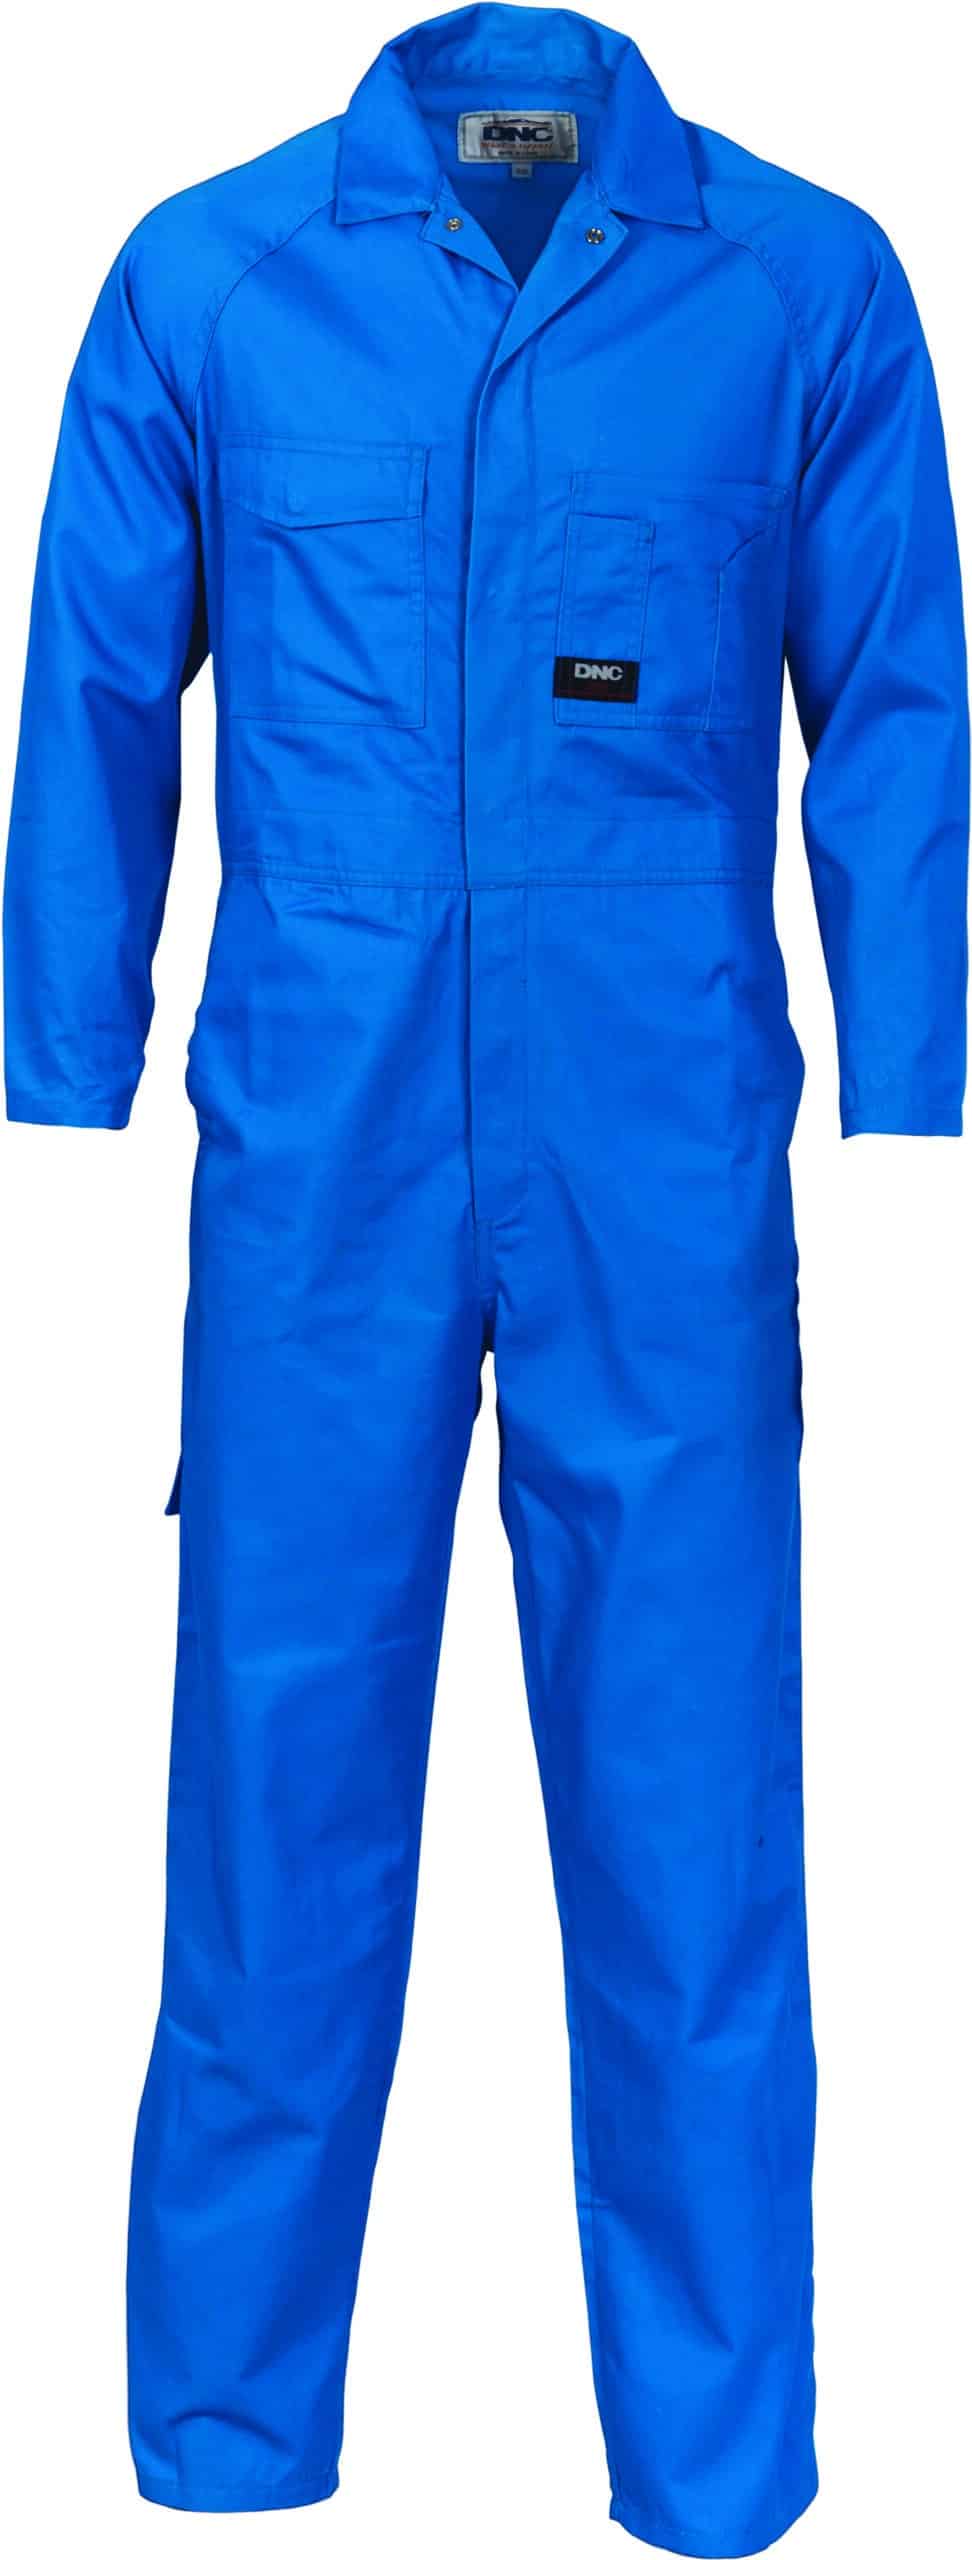 DNC Workwear Polyester Cotton Coverall